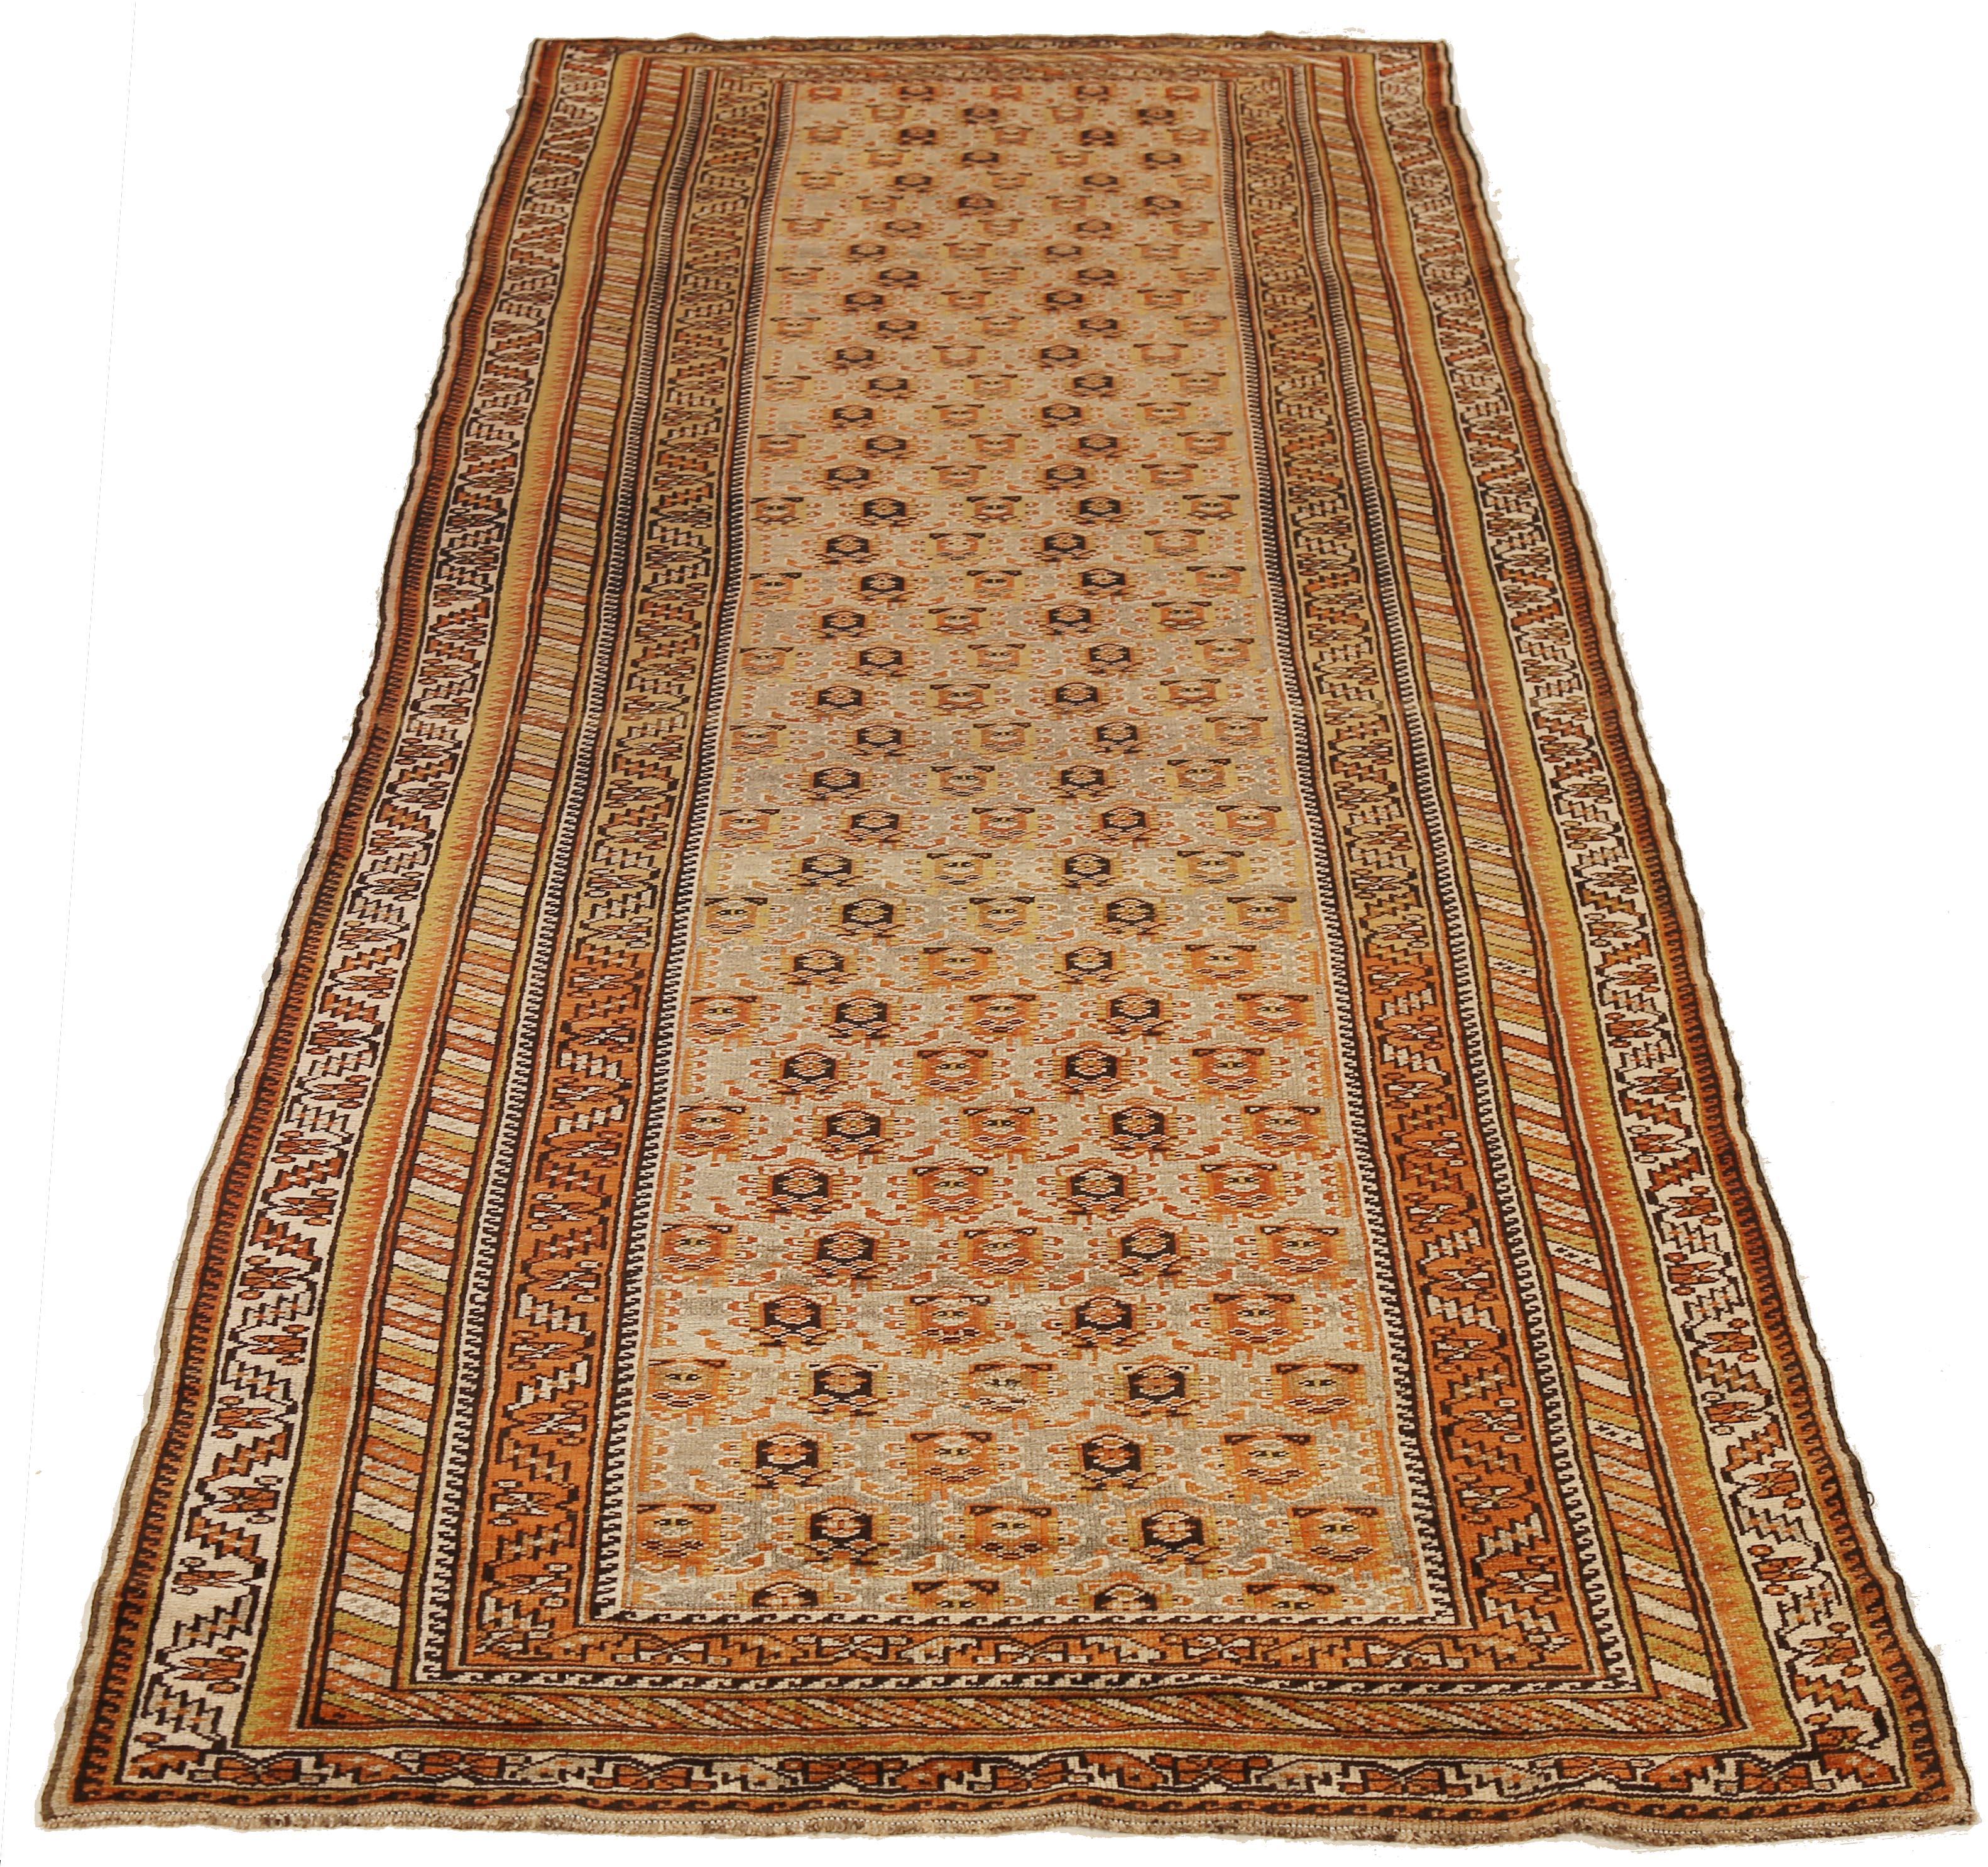 Antique Russian rug handwoven from the finest sheep’s wool and colored with all-natural vegetable dyes that are safe for humans and pets. It’s a traditional Varamin design with Mina-Khani daisies pattern in black and brown on a beige field. It’s a